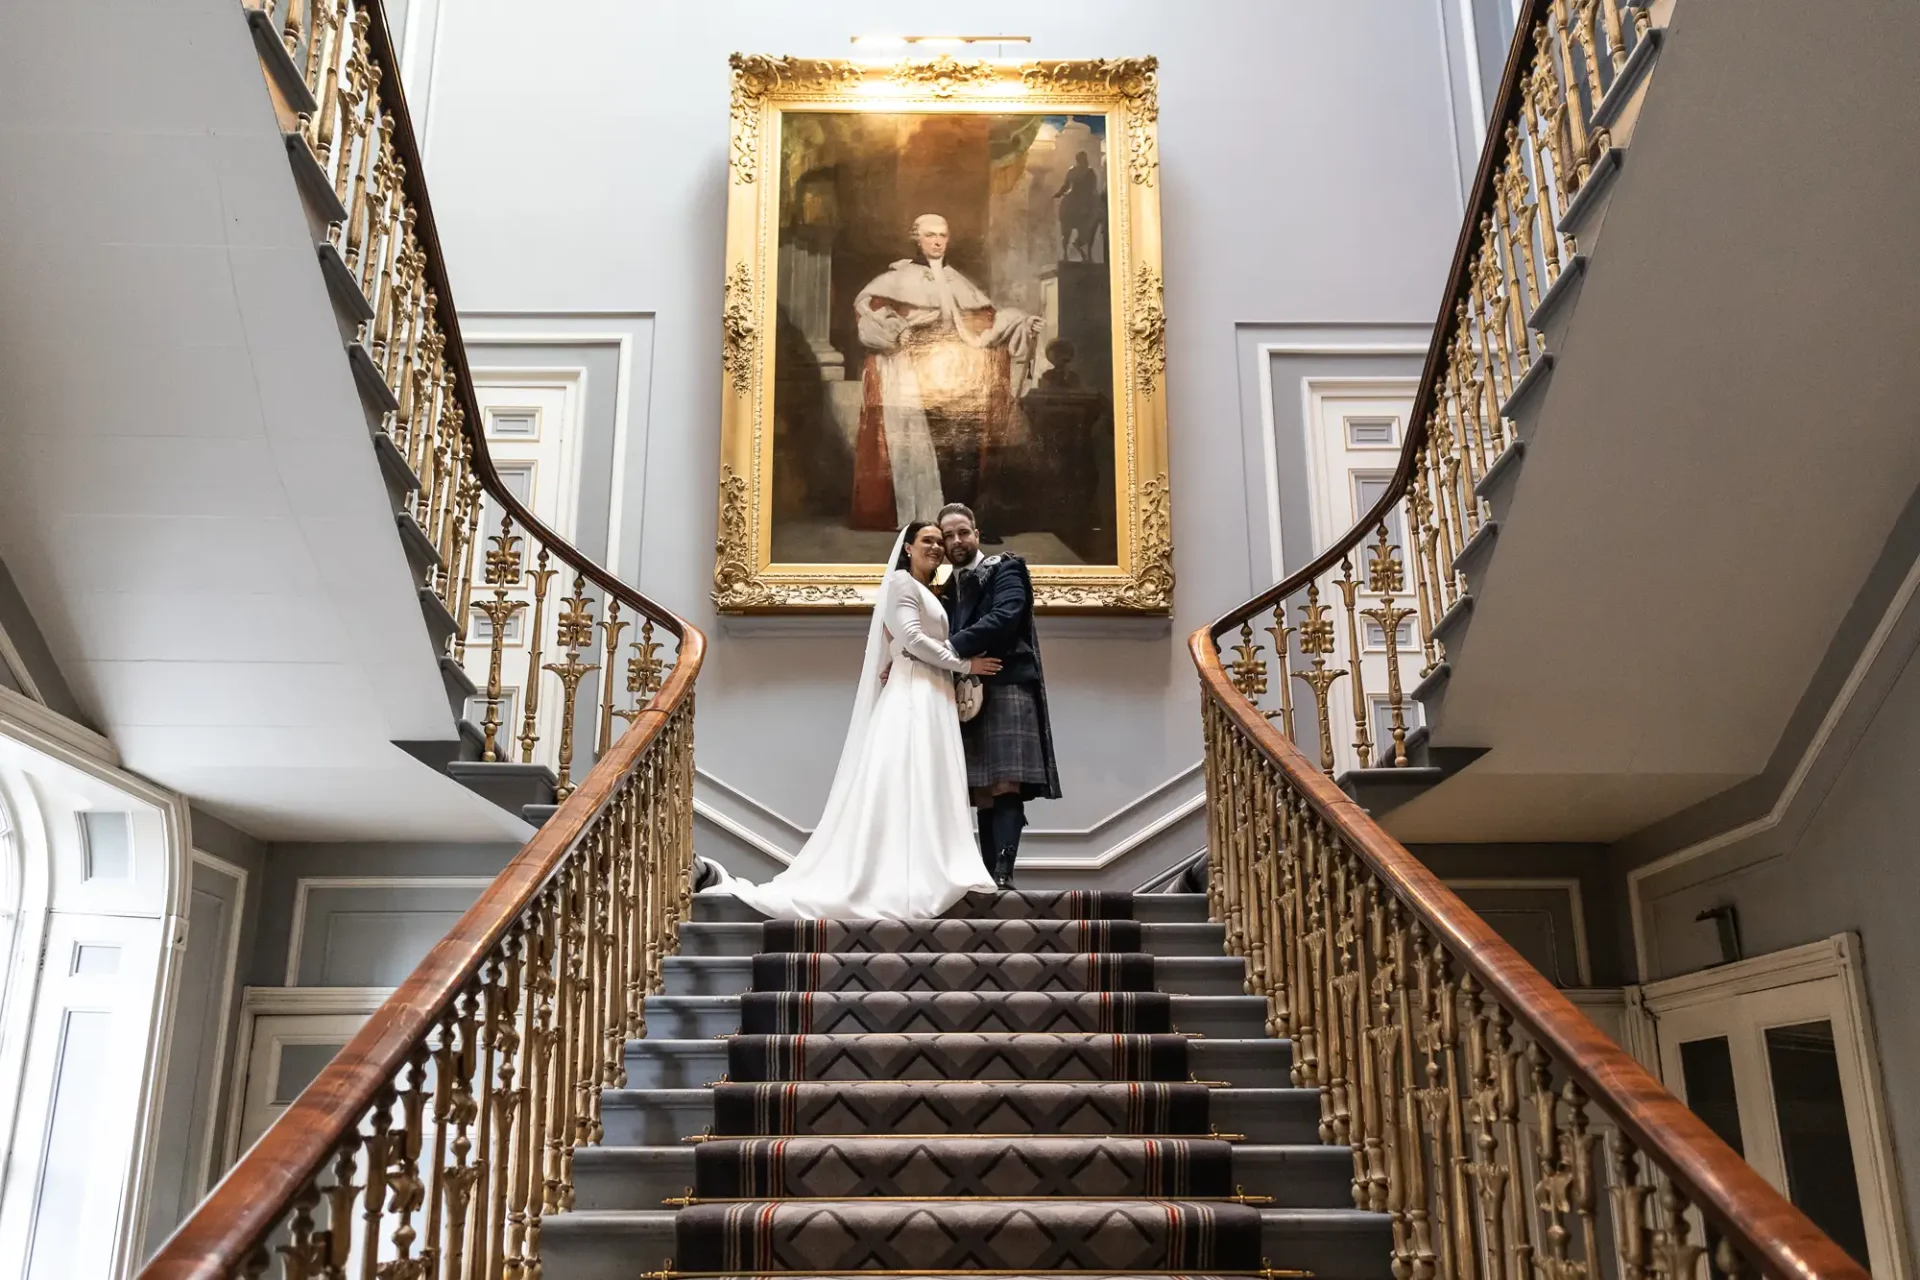 A newlywed couple embraces on an ornate staircase under a large portrait in a grand hall.